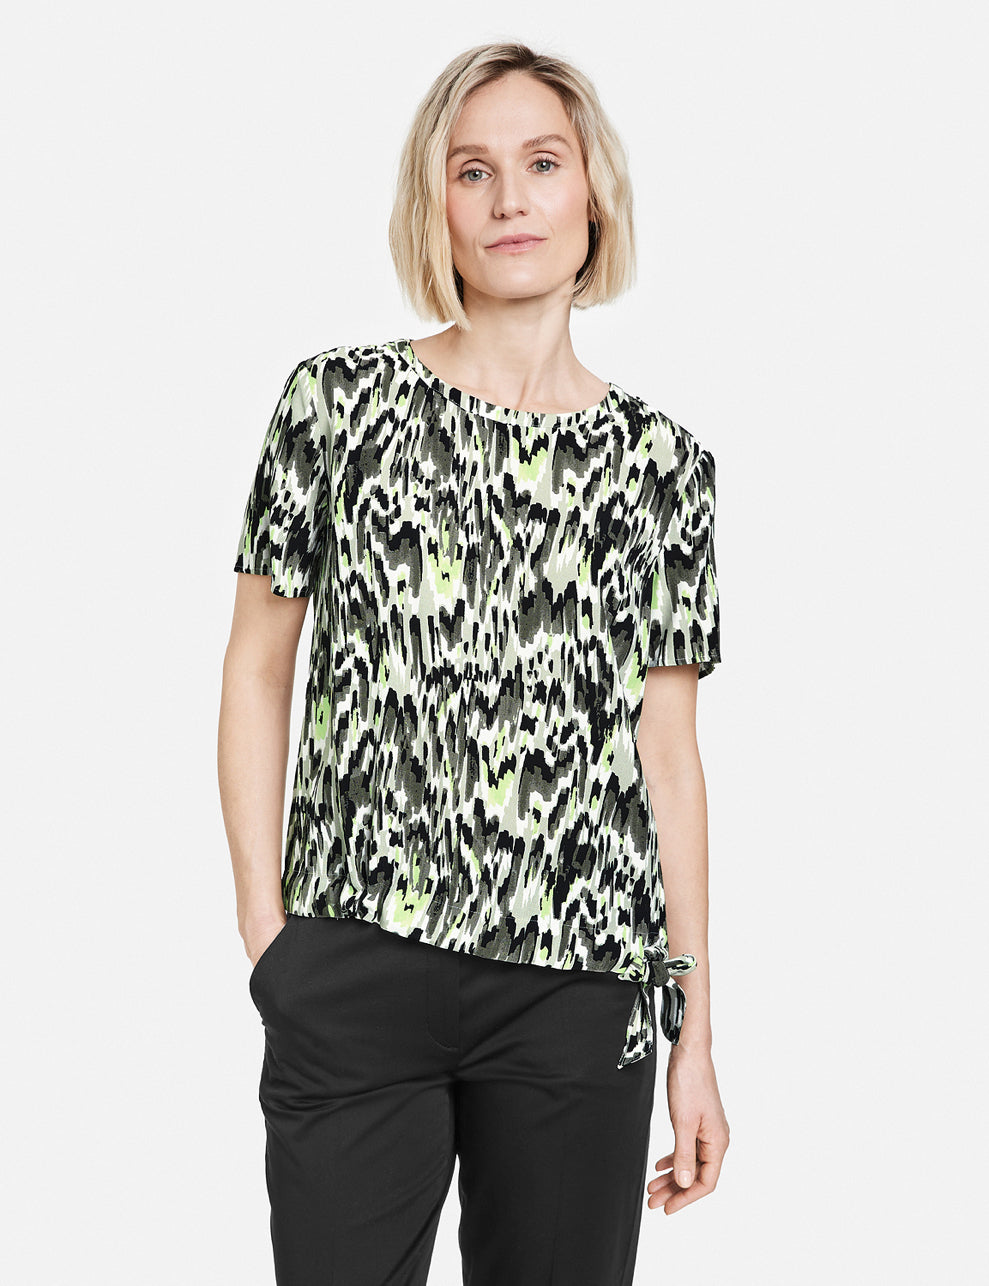 Patterned Blouse Top With A Drawstring In The Hem